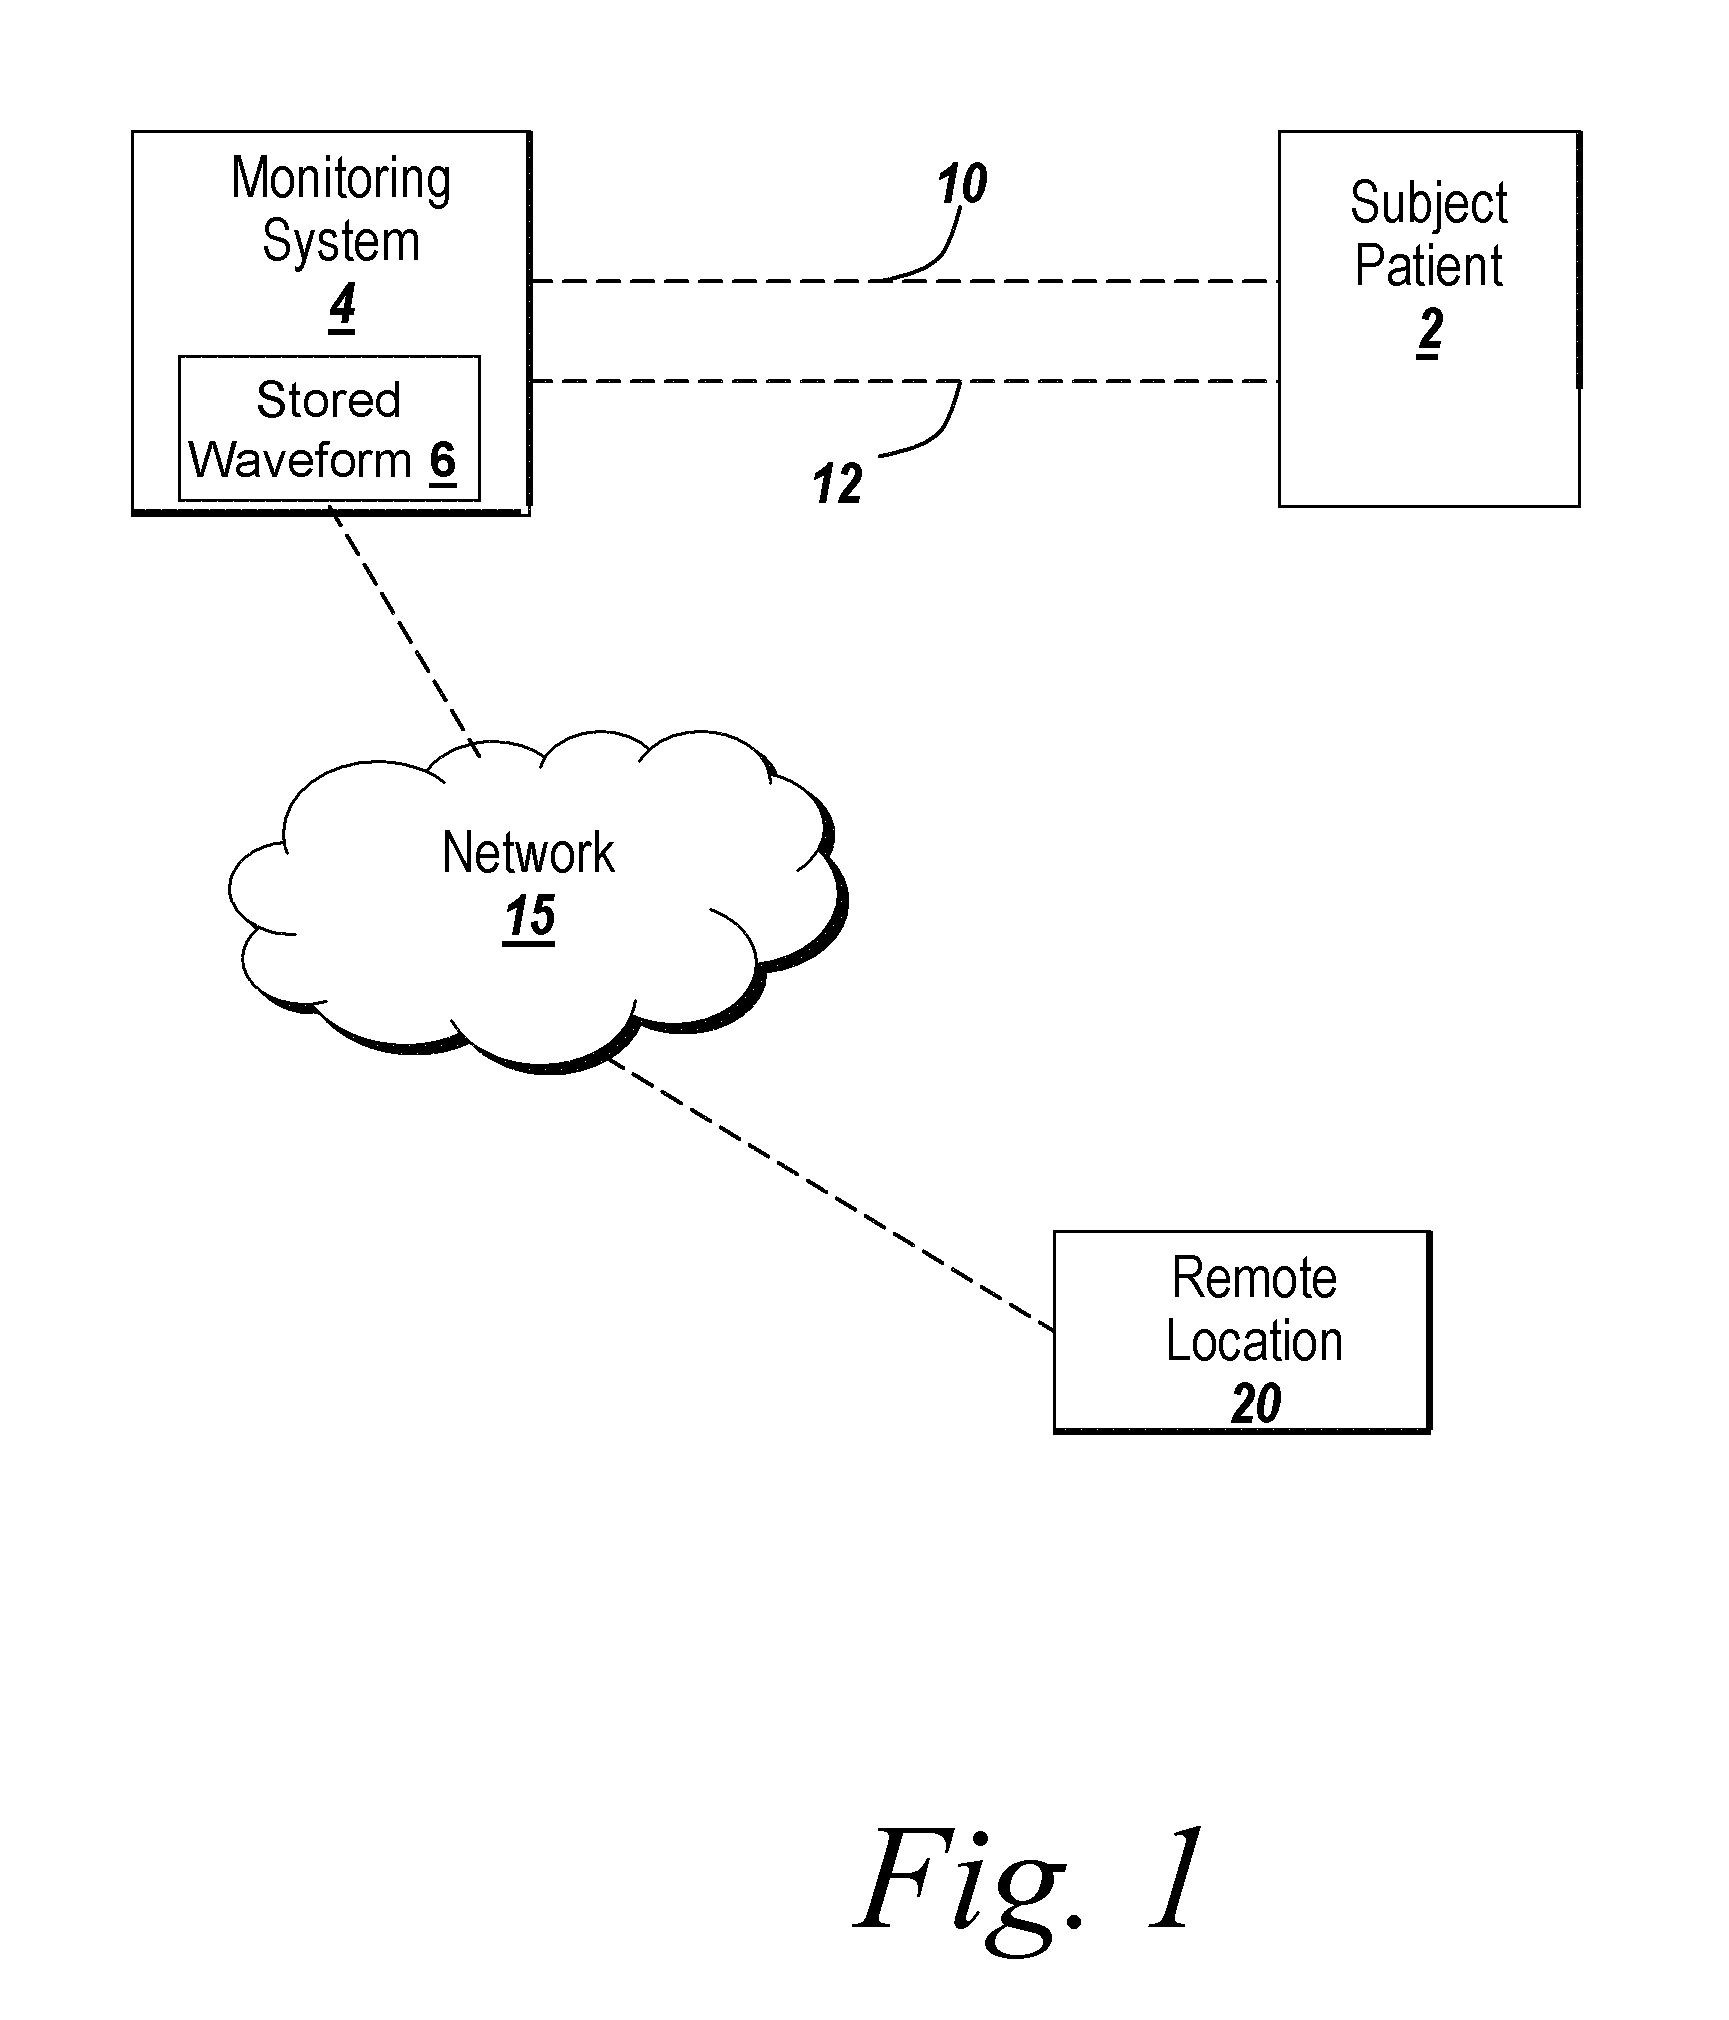 Method for using a non-invasive cardiac and respiratory monitoring system